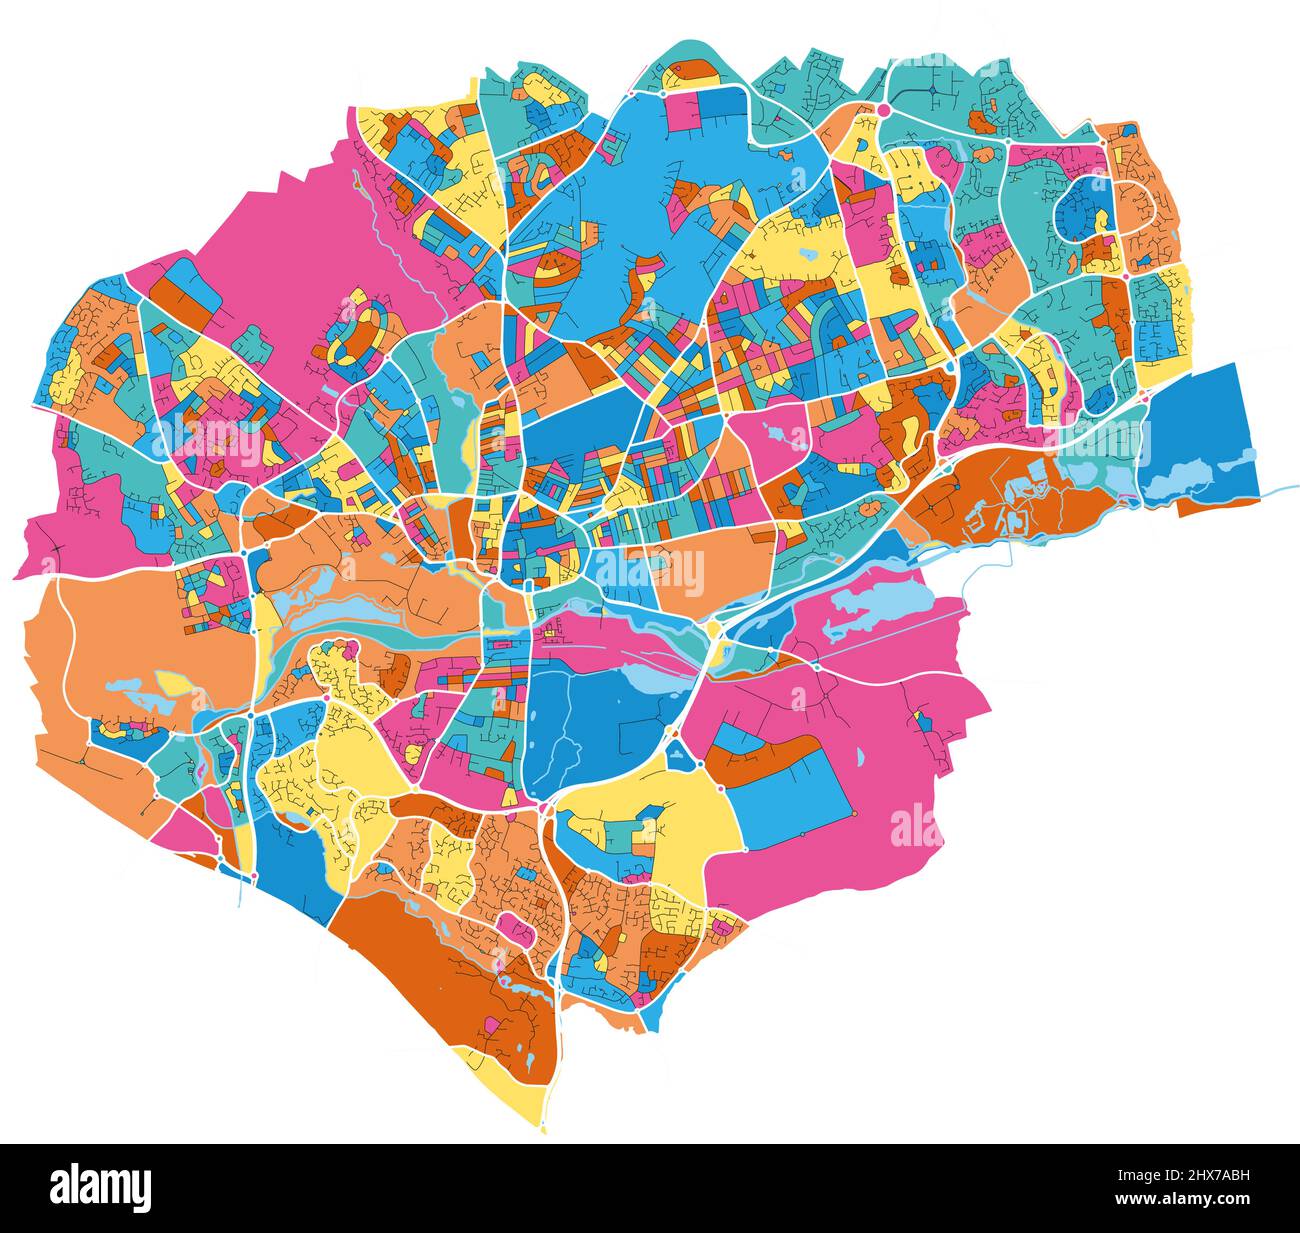 Northampton, East Midlands, England colorful high resolution vector art map with city boundaries. White outlines for main roads. Many details. Blue sh Stock Vector